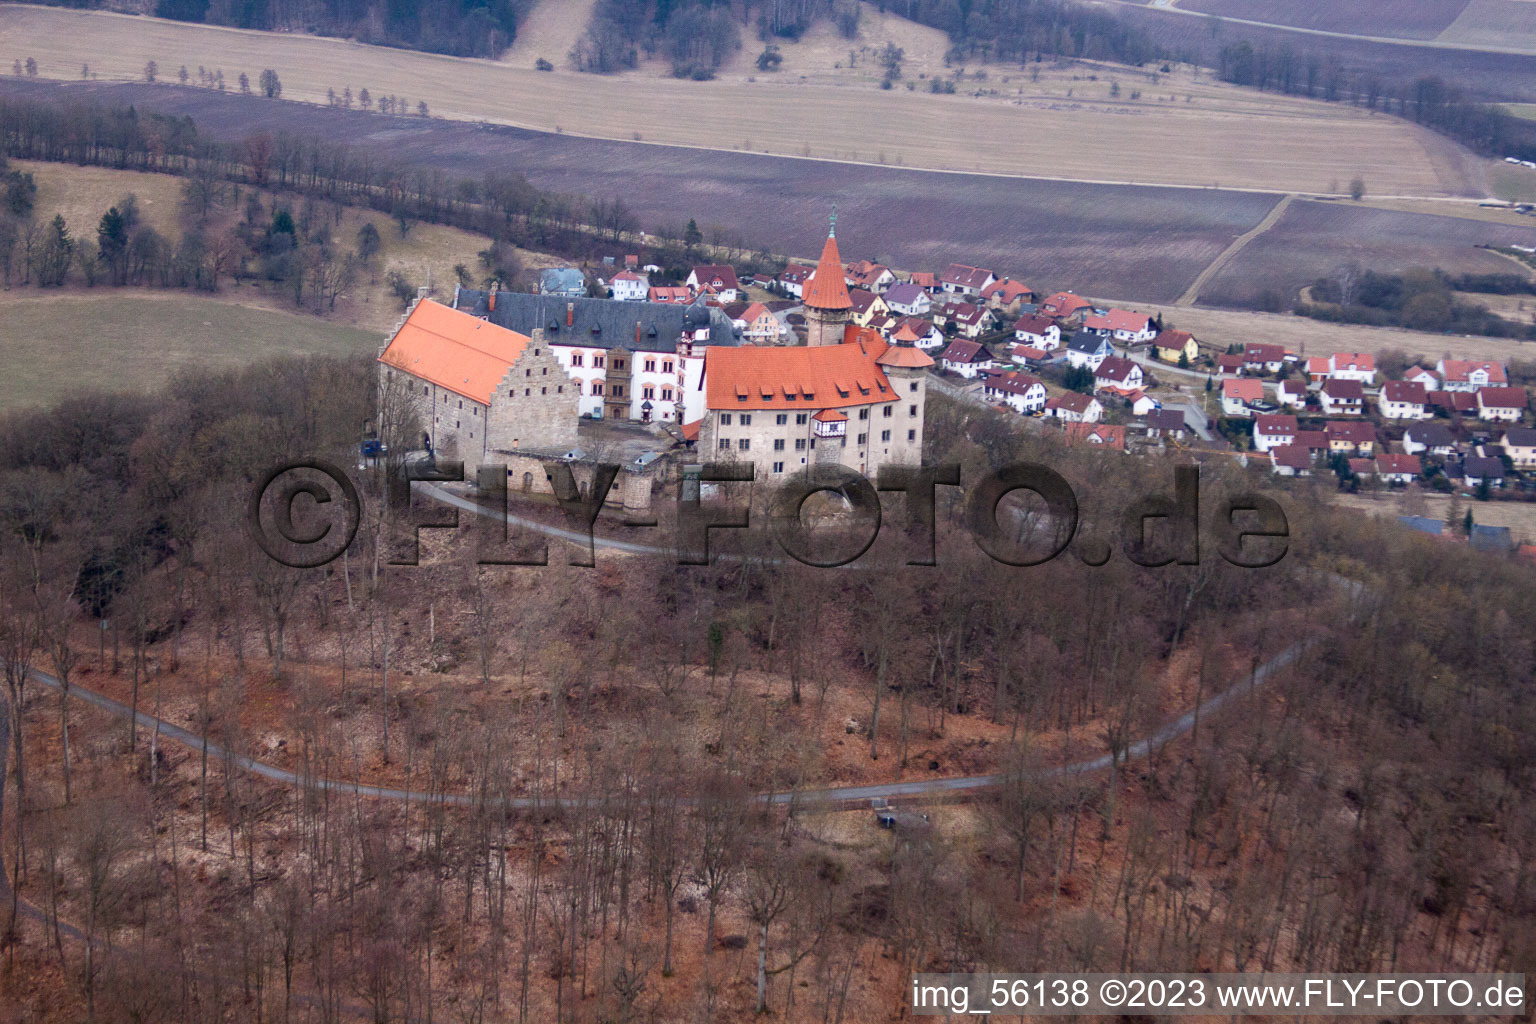 Fortress Heldburg in Bad Colberg-Heldburg in the state Thuringia, Germany